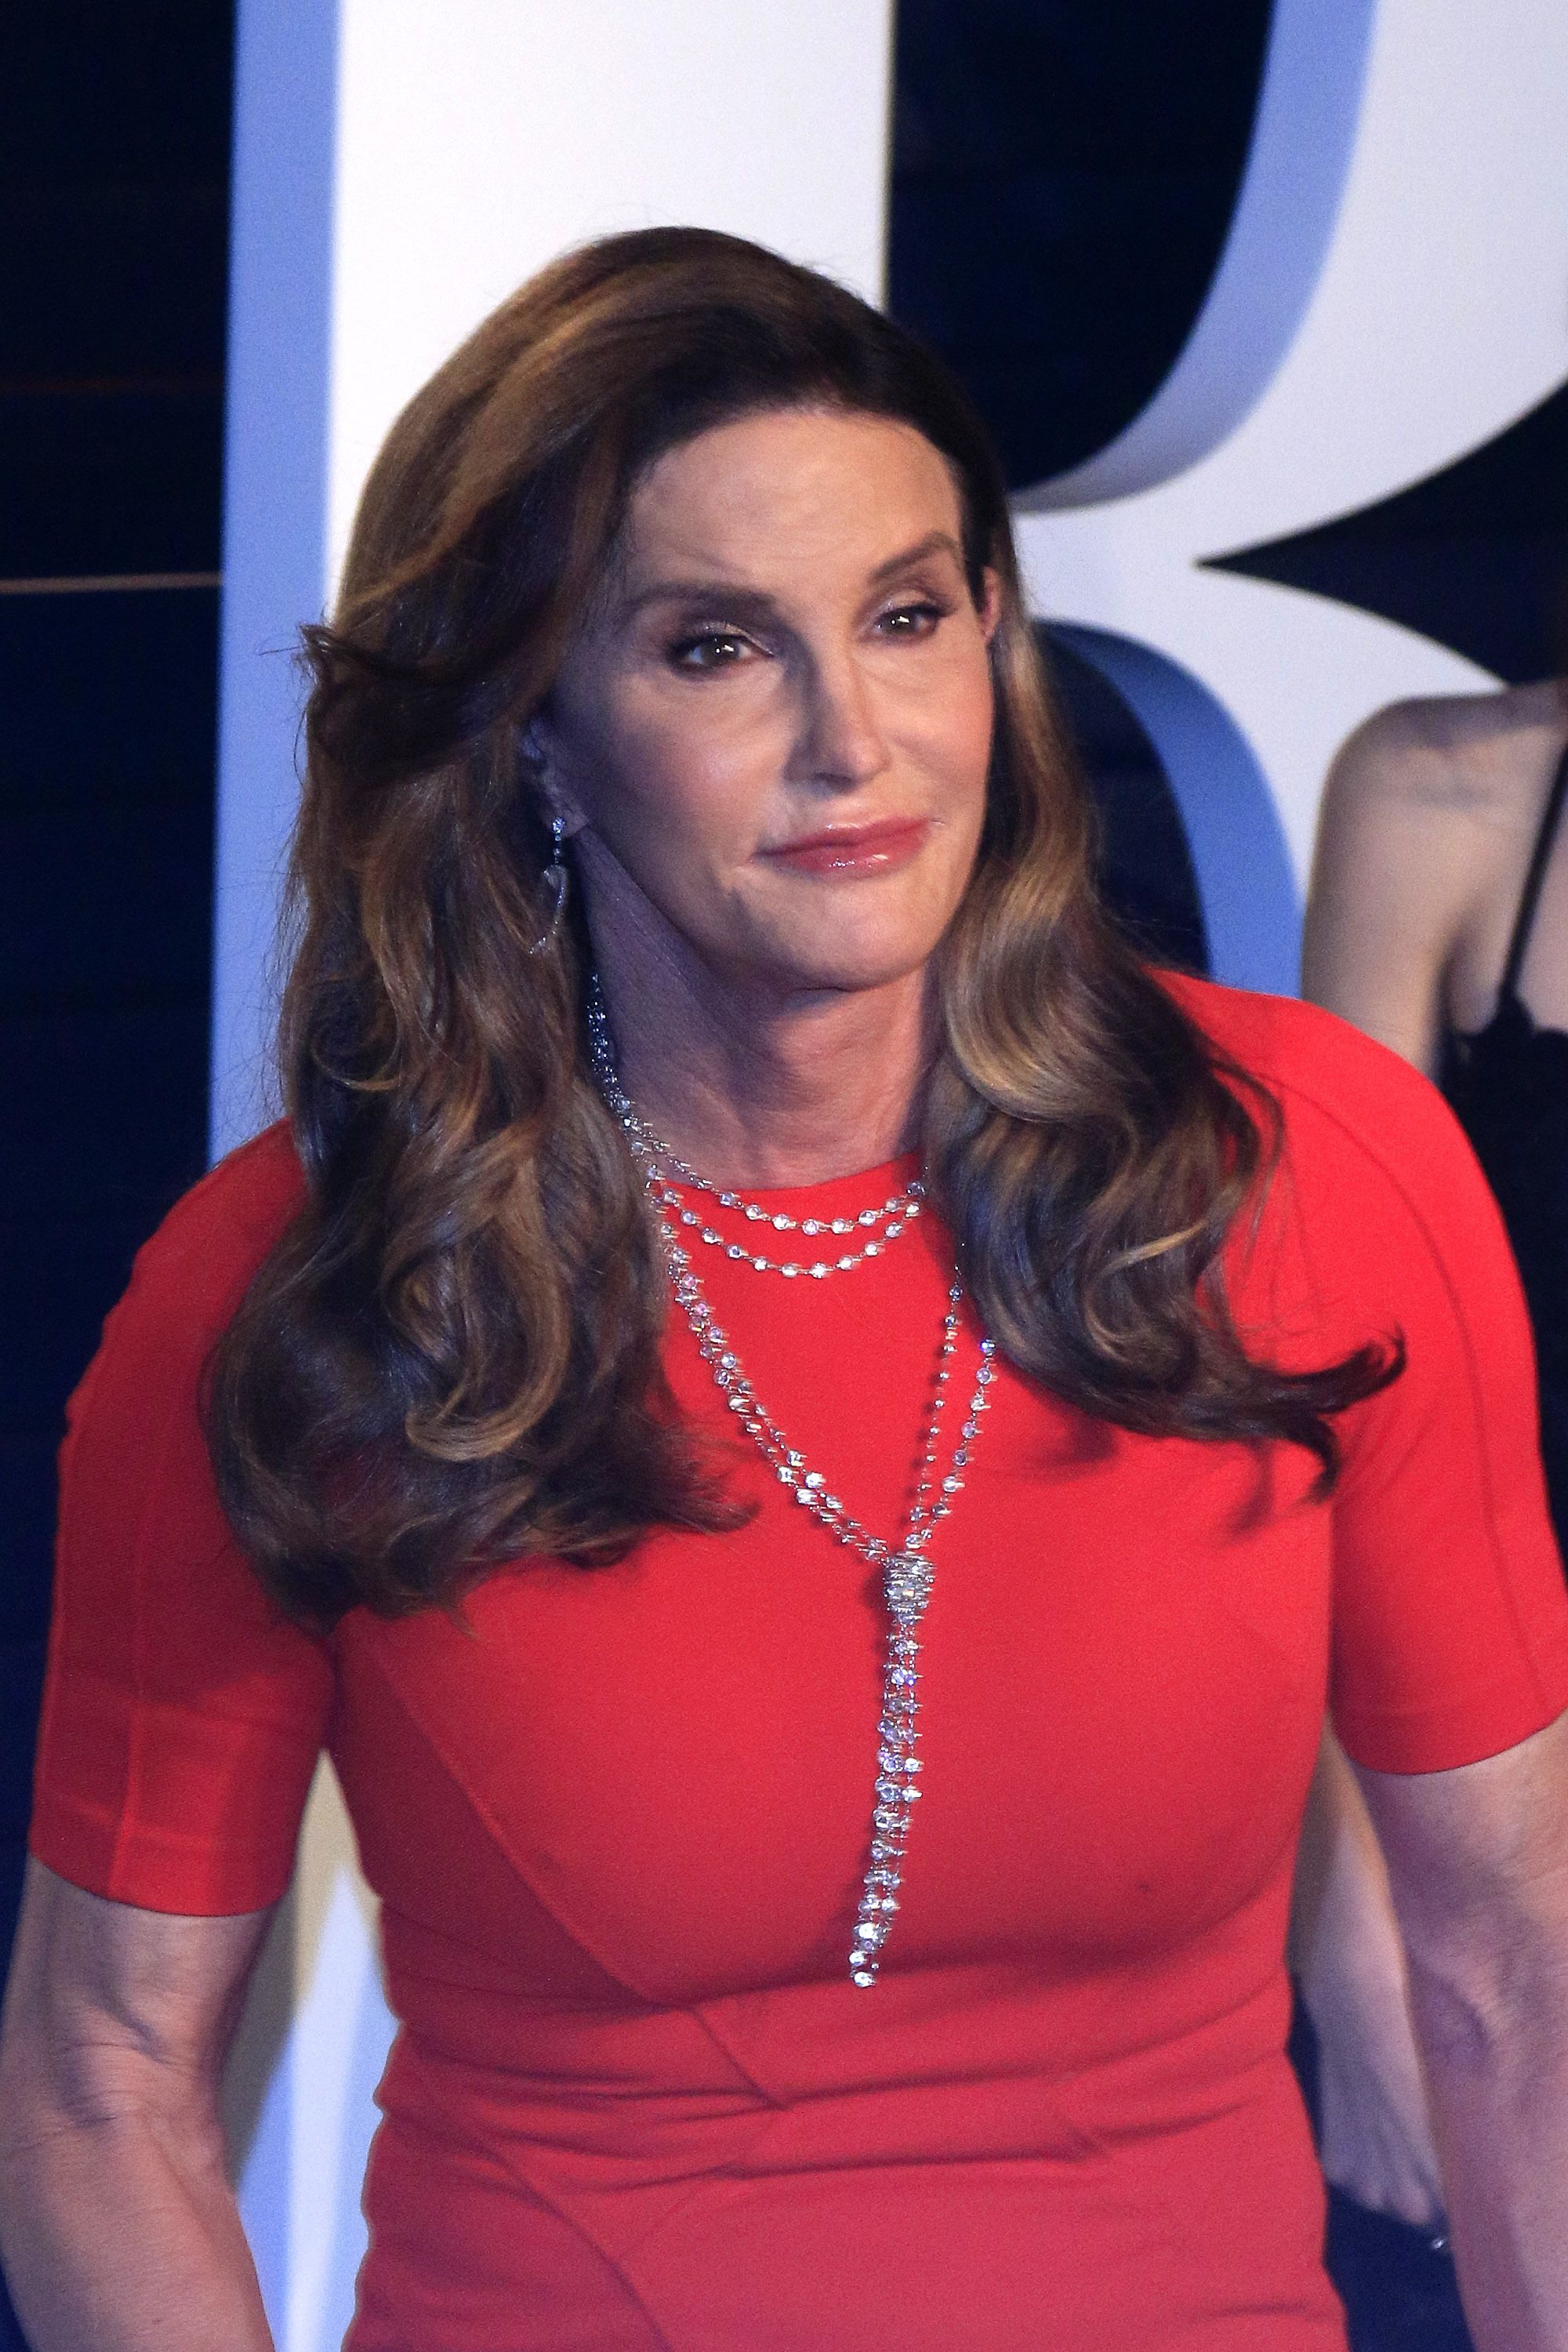 Caitlyn Jenner wears a red dress and diamond necklace.